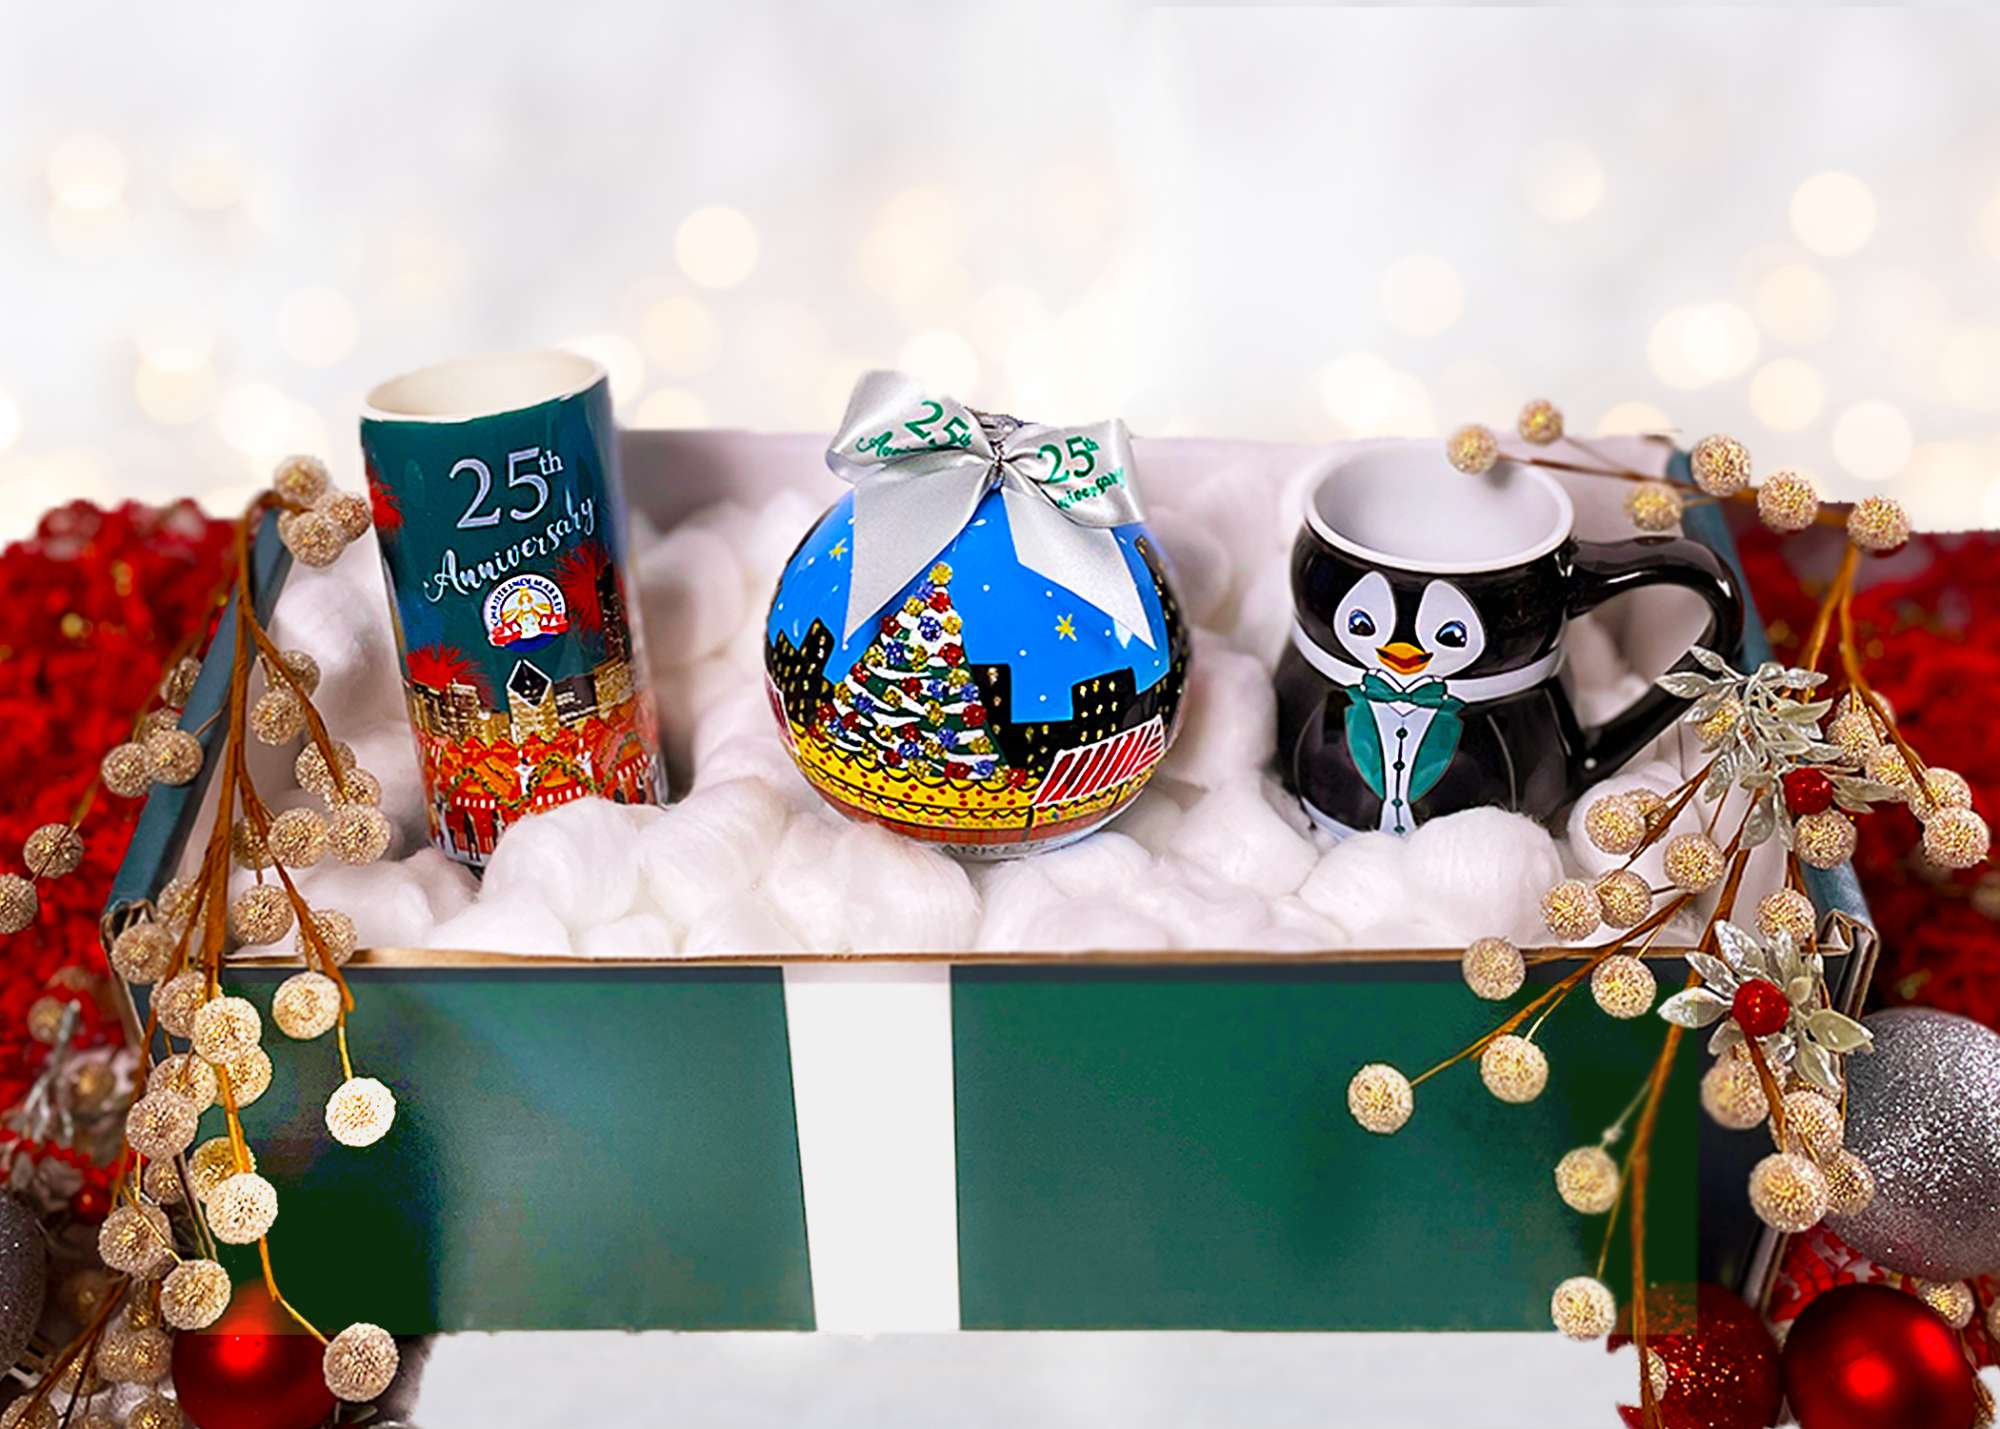 Christkindlmarket Chicago 25th Anniversary Mugs And Ornament Revealed